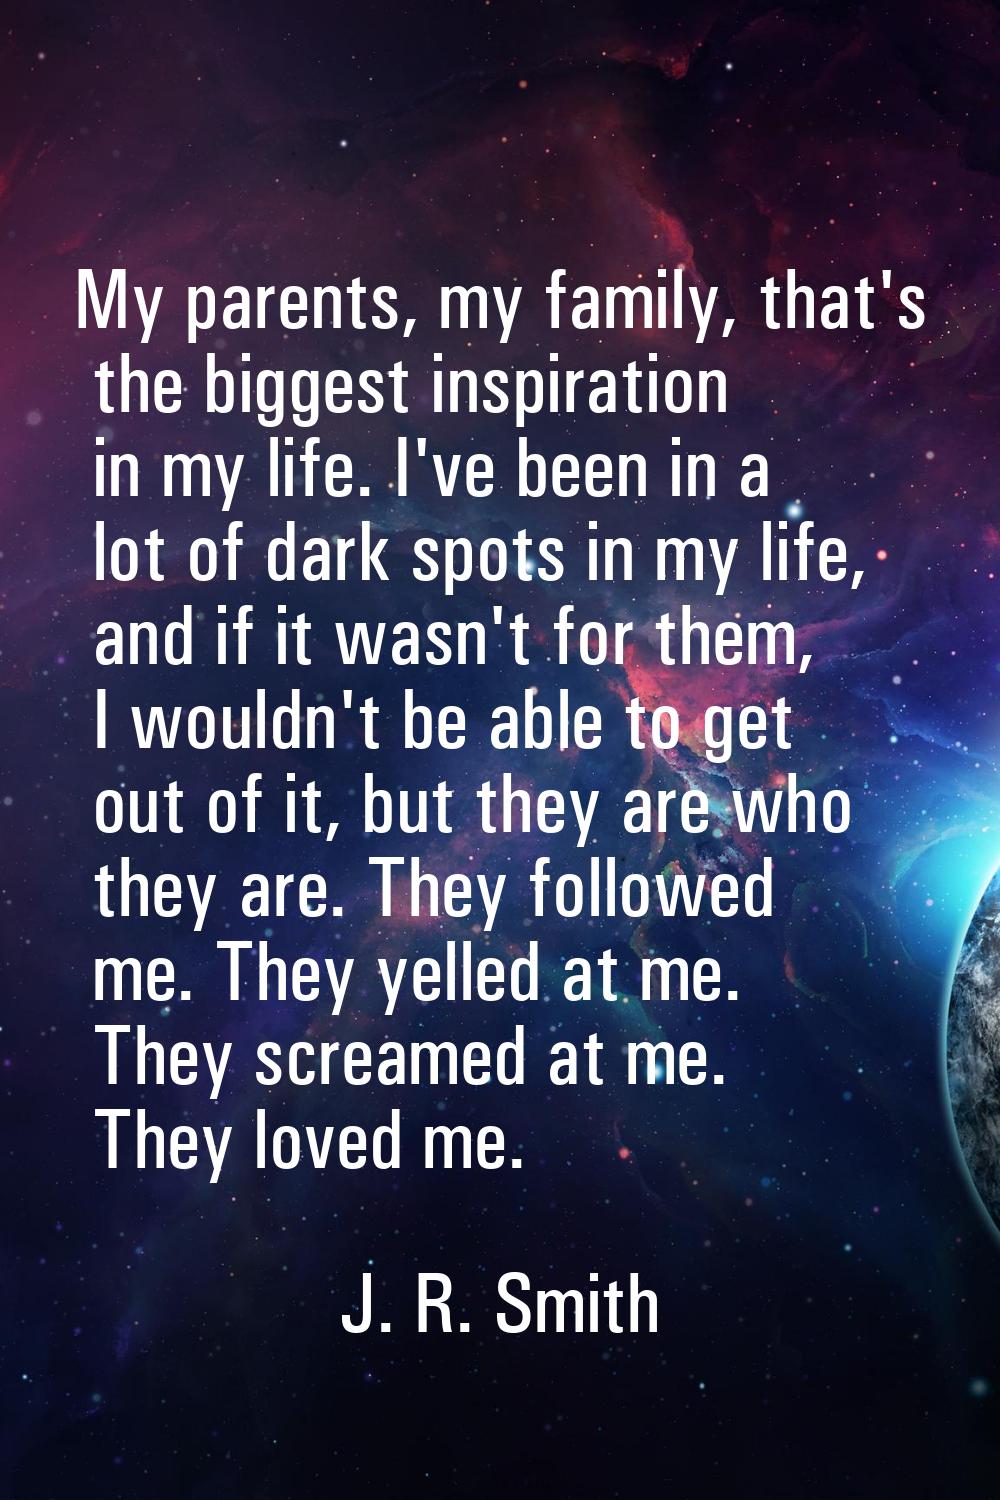 My parents, my family, that's the biggest inspiration in my life. I've been in a lot of dark spots 